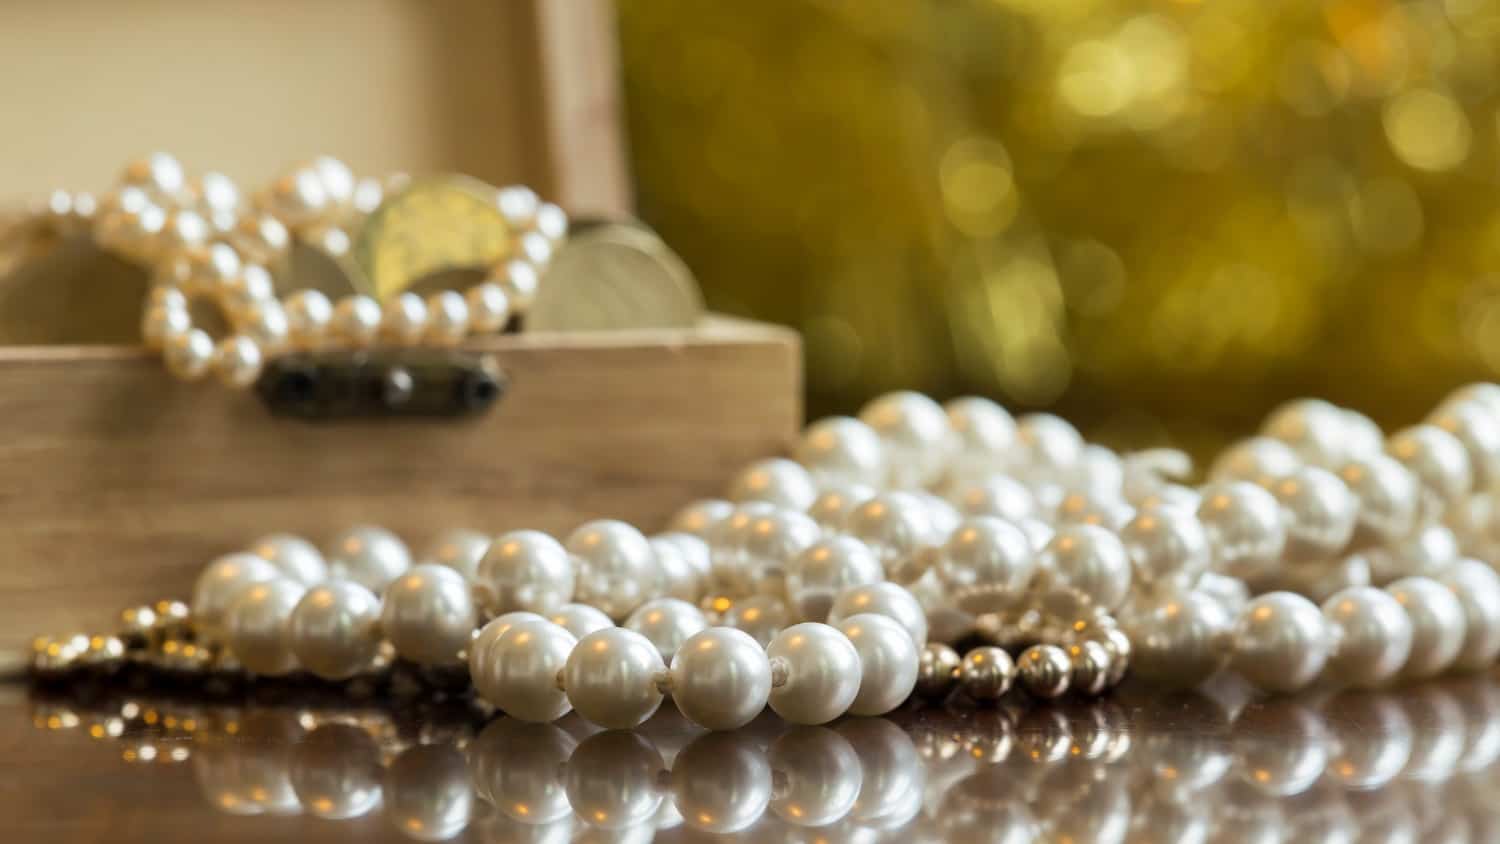 Tips and Information to Help You Care for Mother of Pearl Jewelry